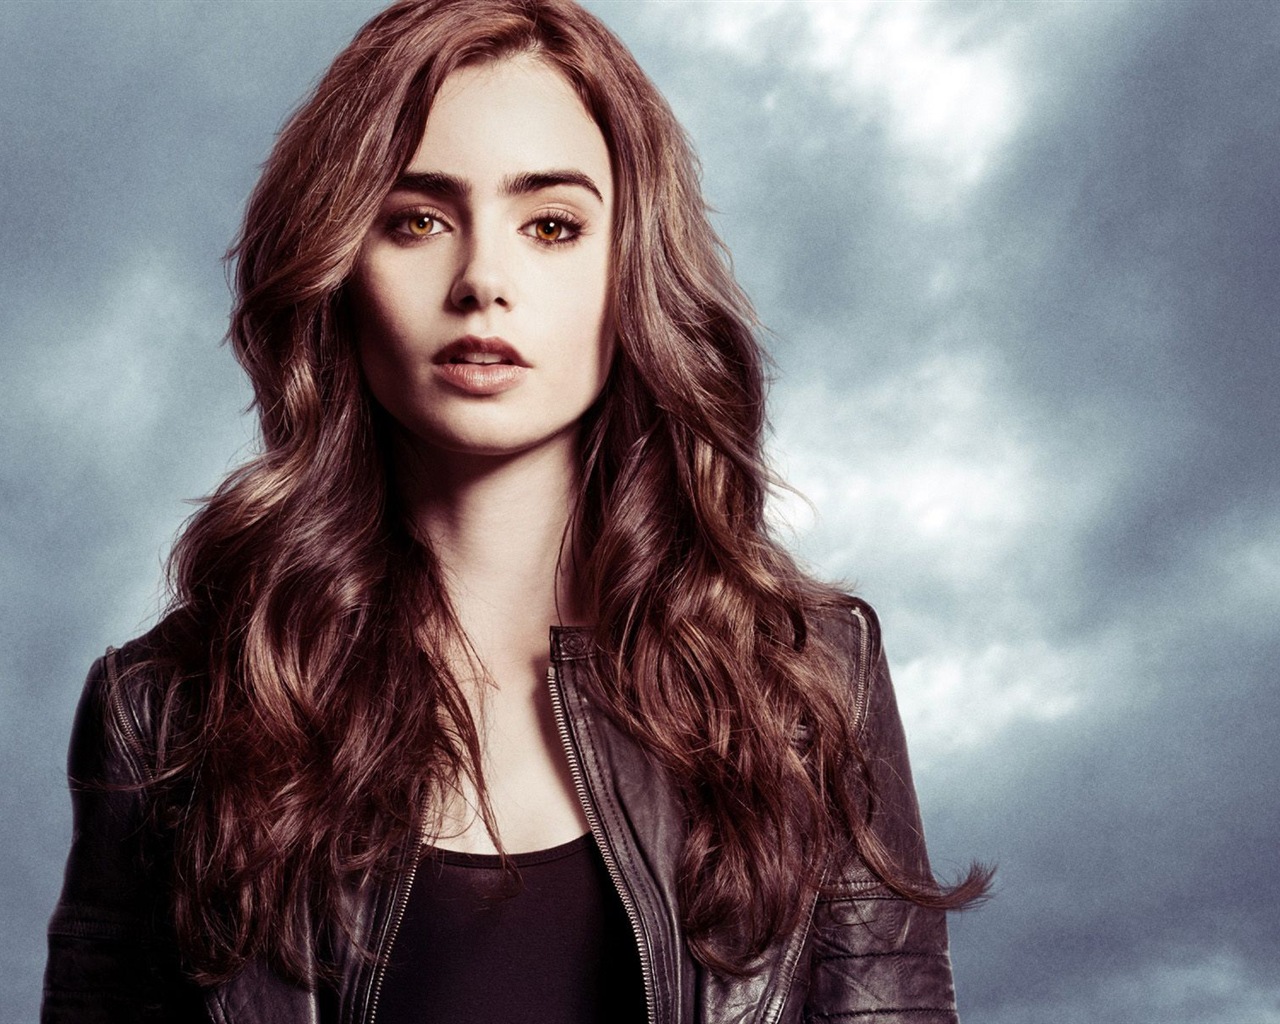 Lily Collins beautiful wallpapers #18 - 1280x1024